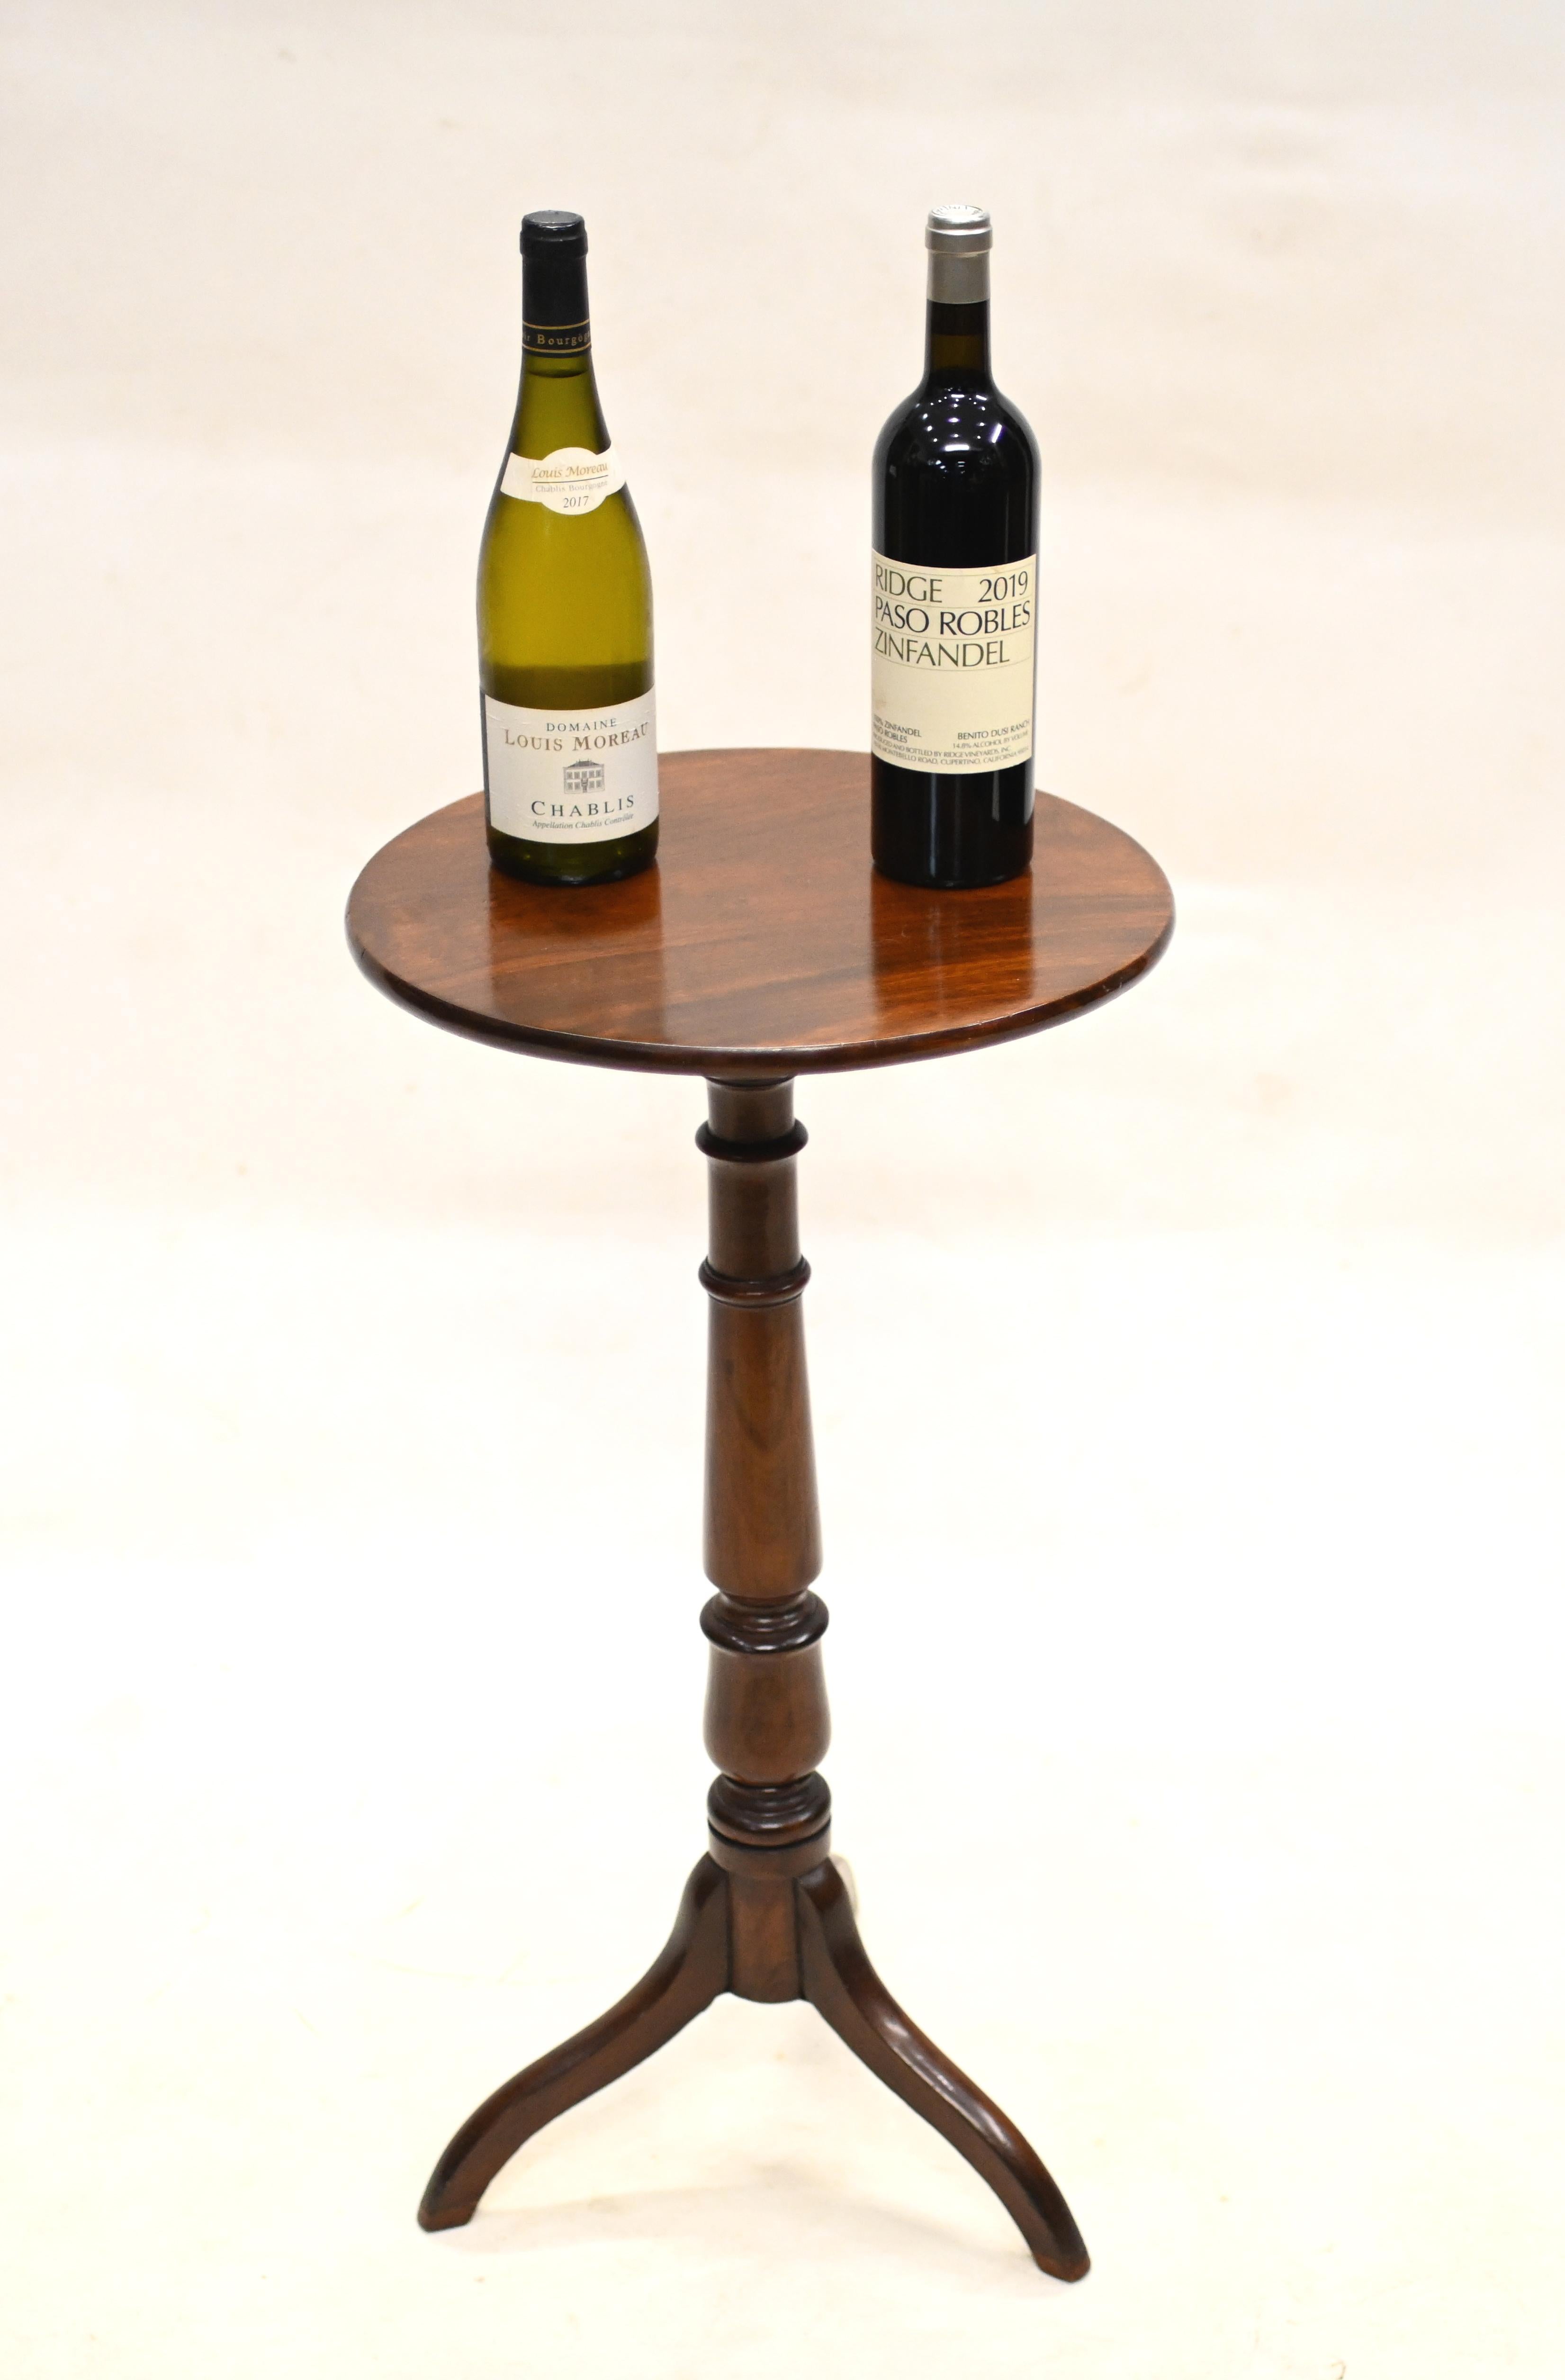 Refined Georgian wine table in mahogany
Can of course also function as a side table
Offered in great shape and will ship to anywhere in the world
Please contact us for a shipping quote or if you have any other question
Showroom based in North London